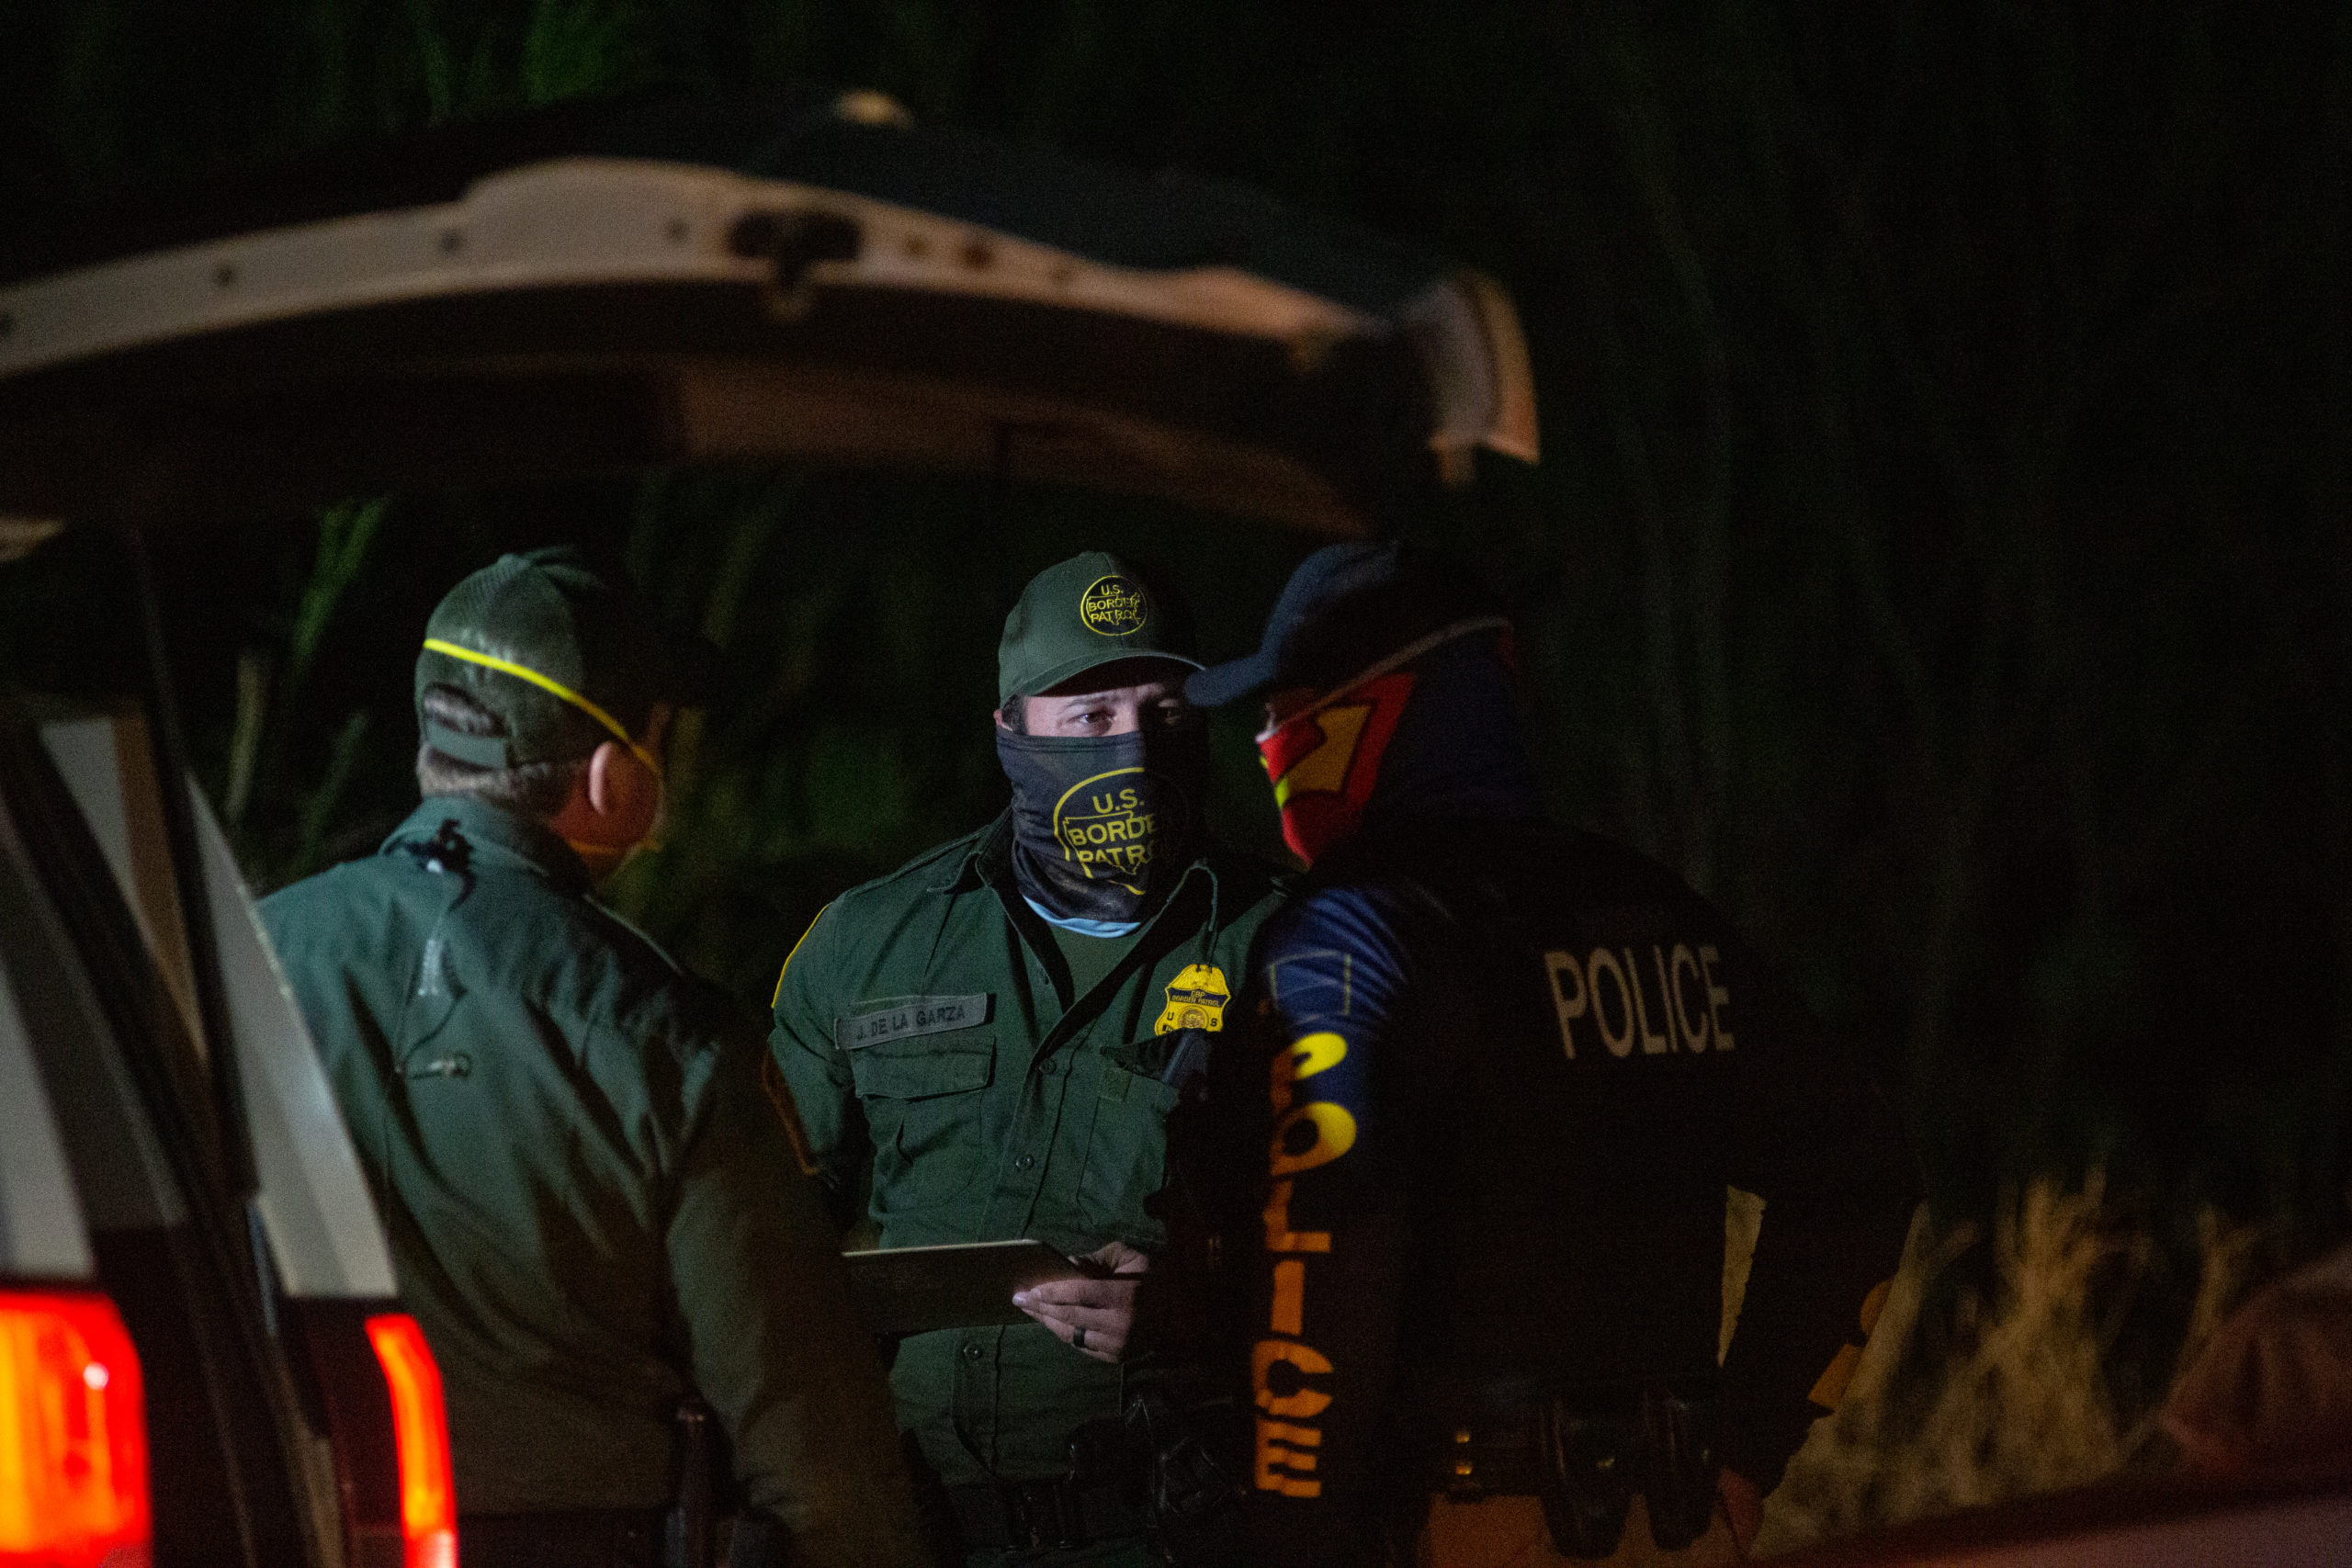 Customs and Border Protection officials work on processing groups of migrants arriving illegally in the U.S. in the middle of the night on March 26, near La Joya, Texas. (Kaylee Greenlee - Daily Caller News Foundation)